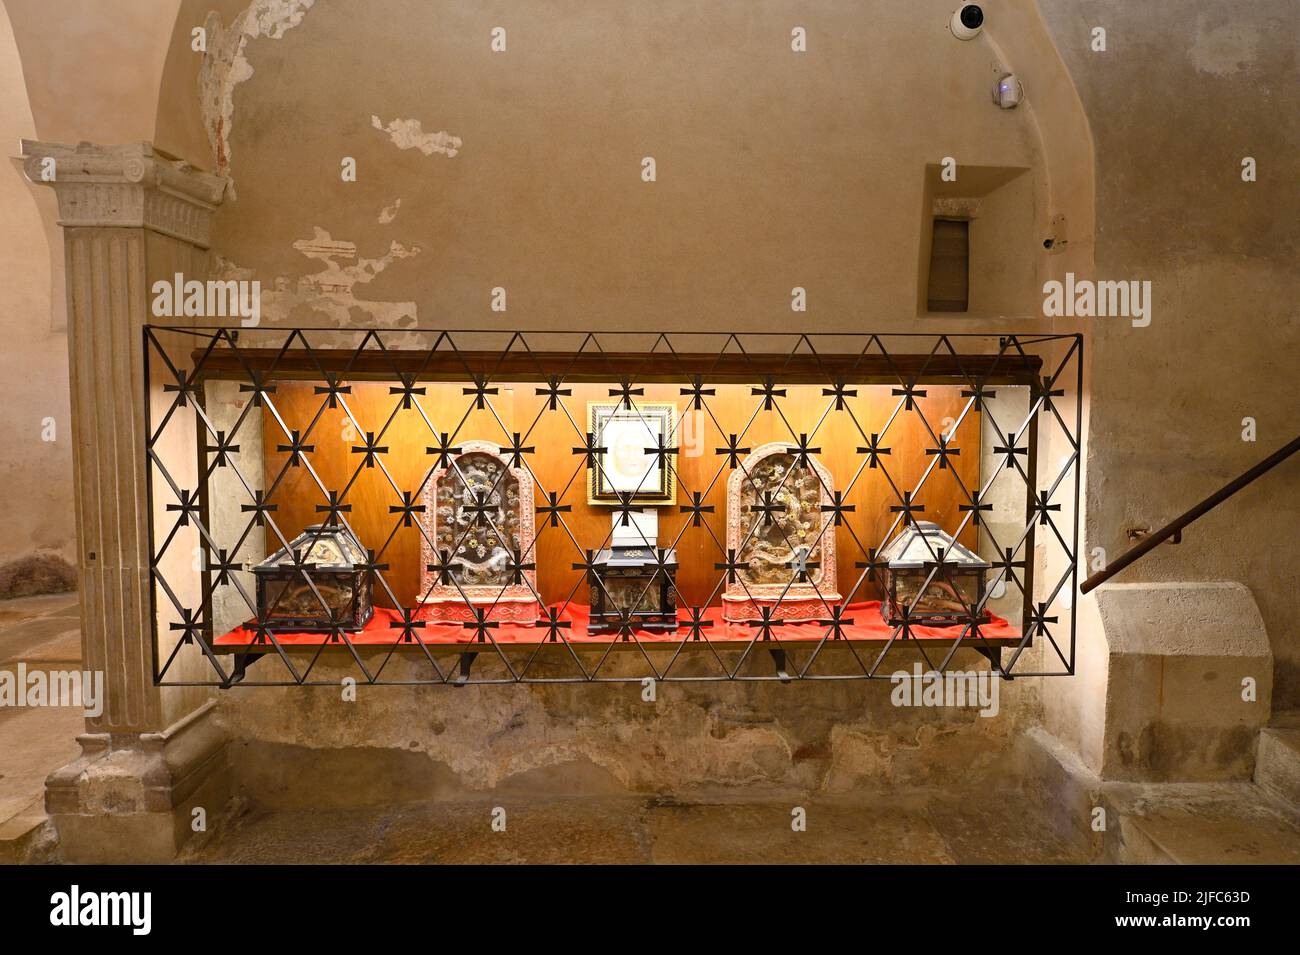 Aquileia, Italy. 19 June 2022. Interior view of the Basilica of Aquileia. Relics of the martyrs of Aquileia, Hermagoras and Fortunatus in the crypt Stock Photo